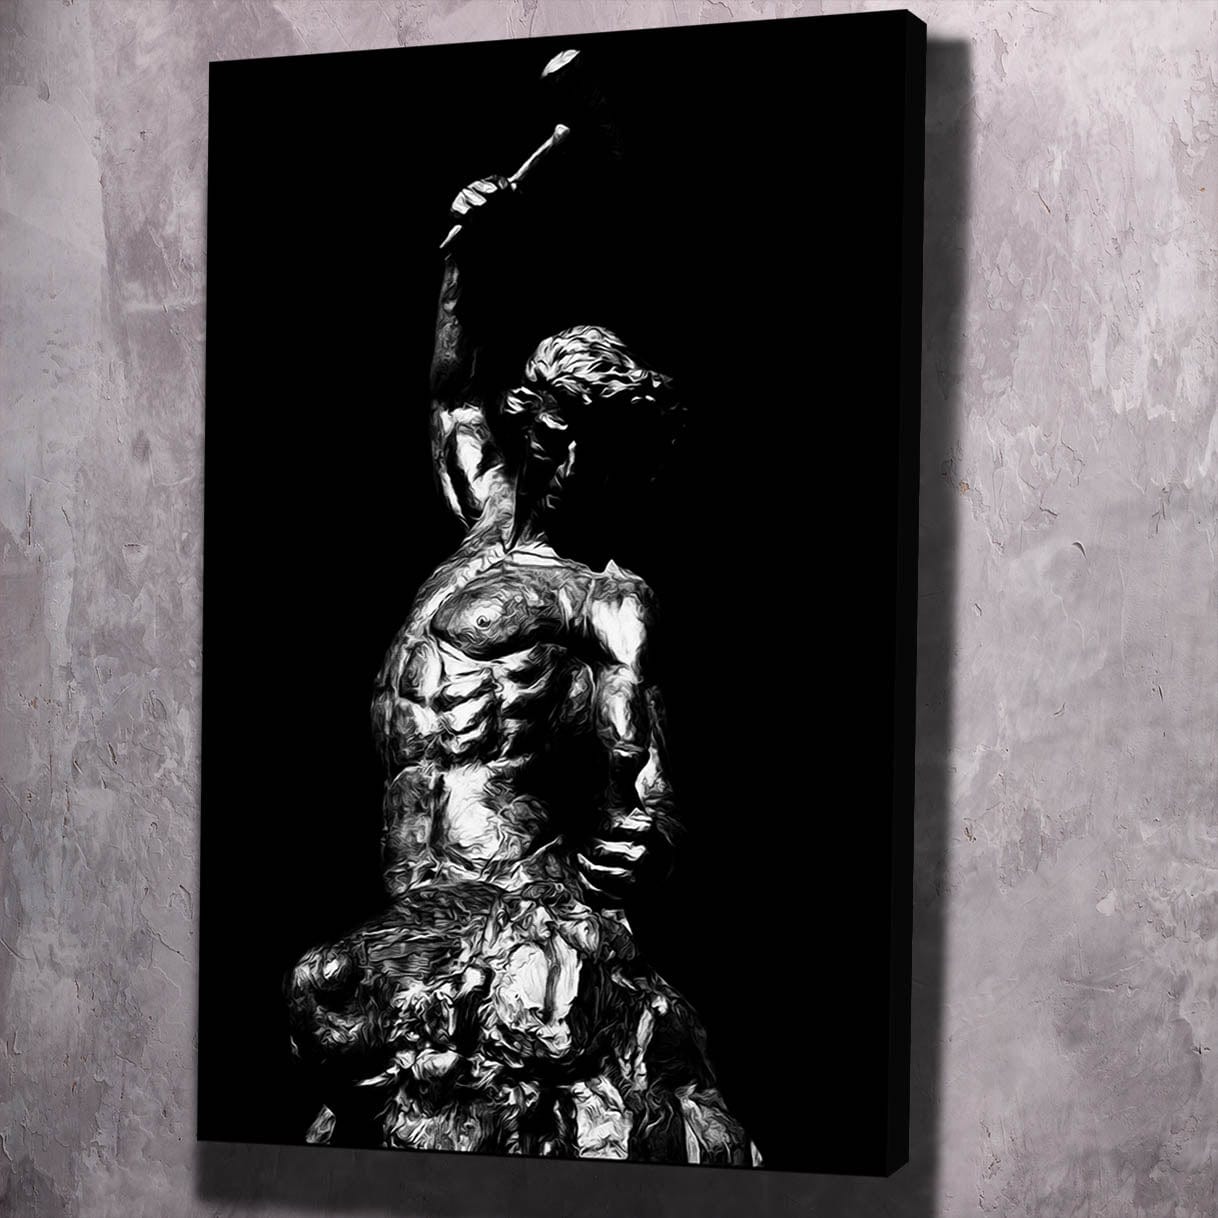 Self Made Man Statue Black White - Shop exclusive inspirational wall art, motivational wall art, office art, home office wall decor quotes, wall art quotes, office artwork, motivational art only at ImpaktMaker in canvas and acrylic formats.